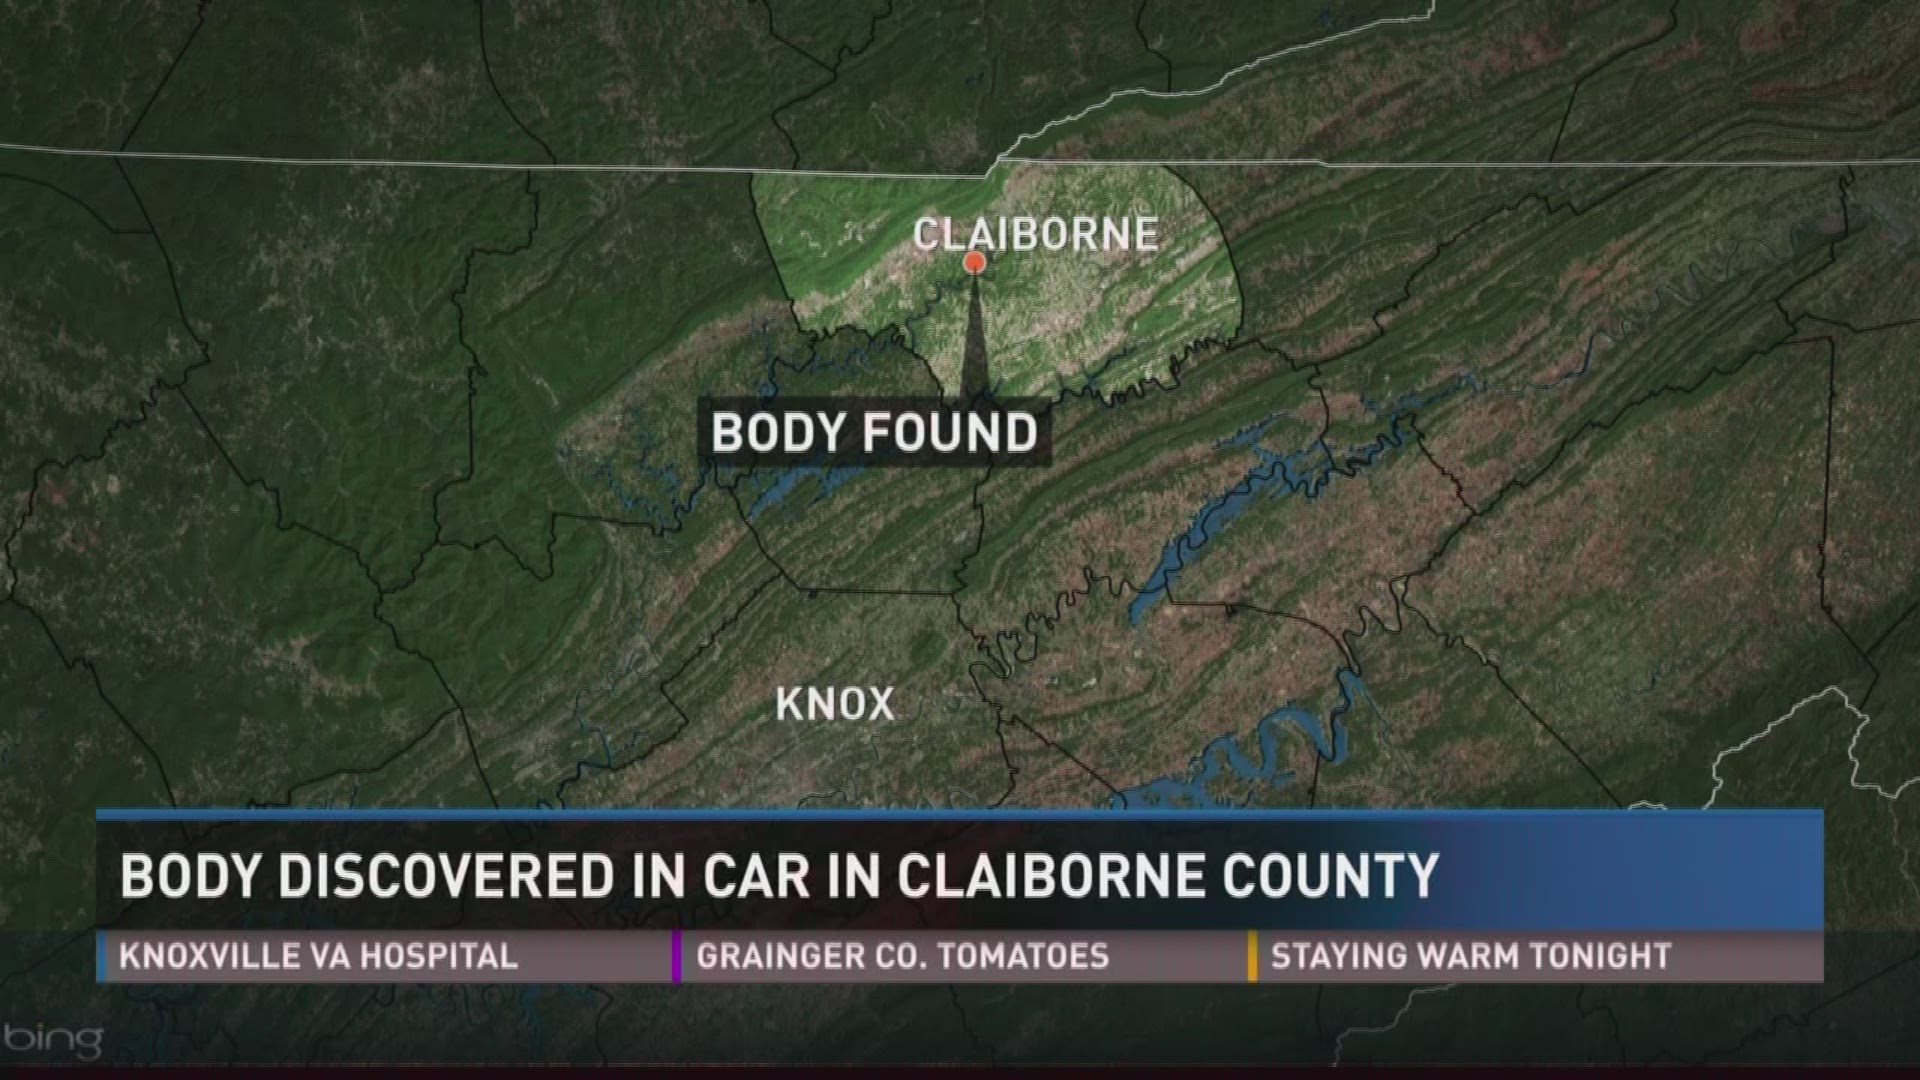 July 20, 2017: Authorities discovered a body in Claiborne County near Powell River.